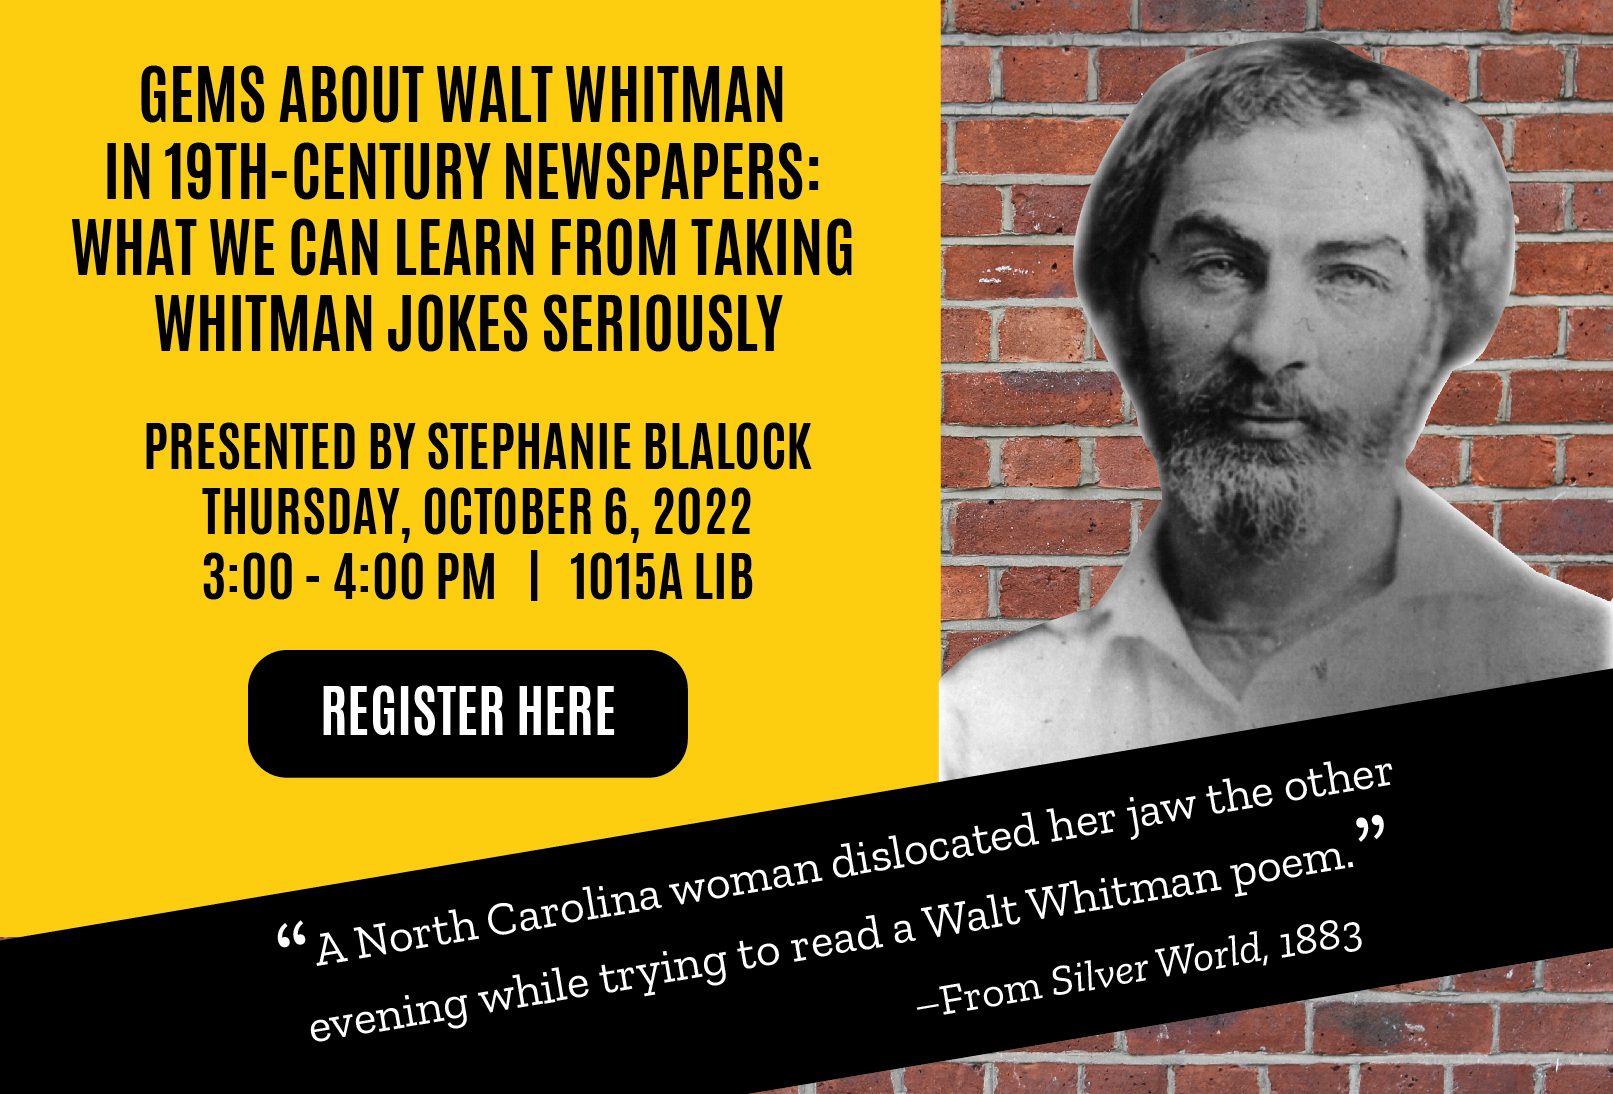 Text: Gems About Walt Whitman in 19th-Century Newspapers: What We can Learn from taking Whitman Jokes Seriously. Presented by Stephanie Blalock. Thursday, October 6, 2022. 3-4 pm. 1015A LIB. "A North Carolina woman dislocated her jaw the other evening..."